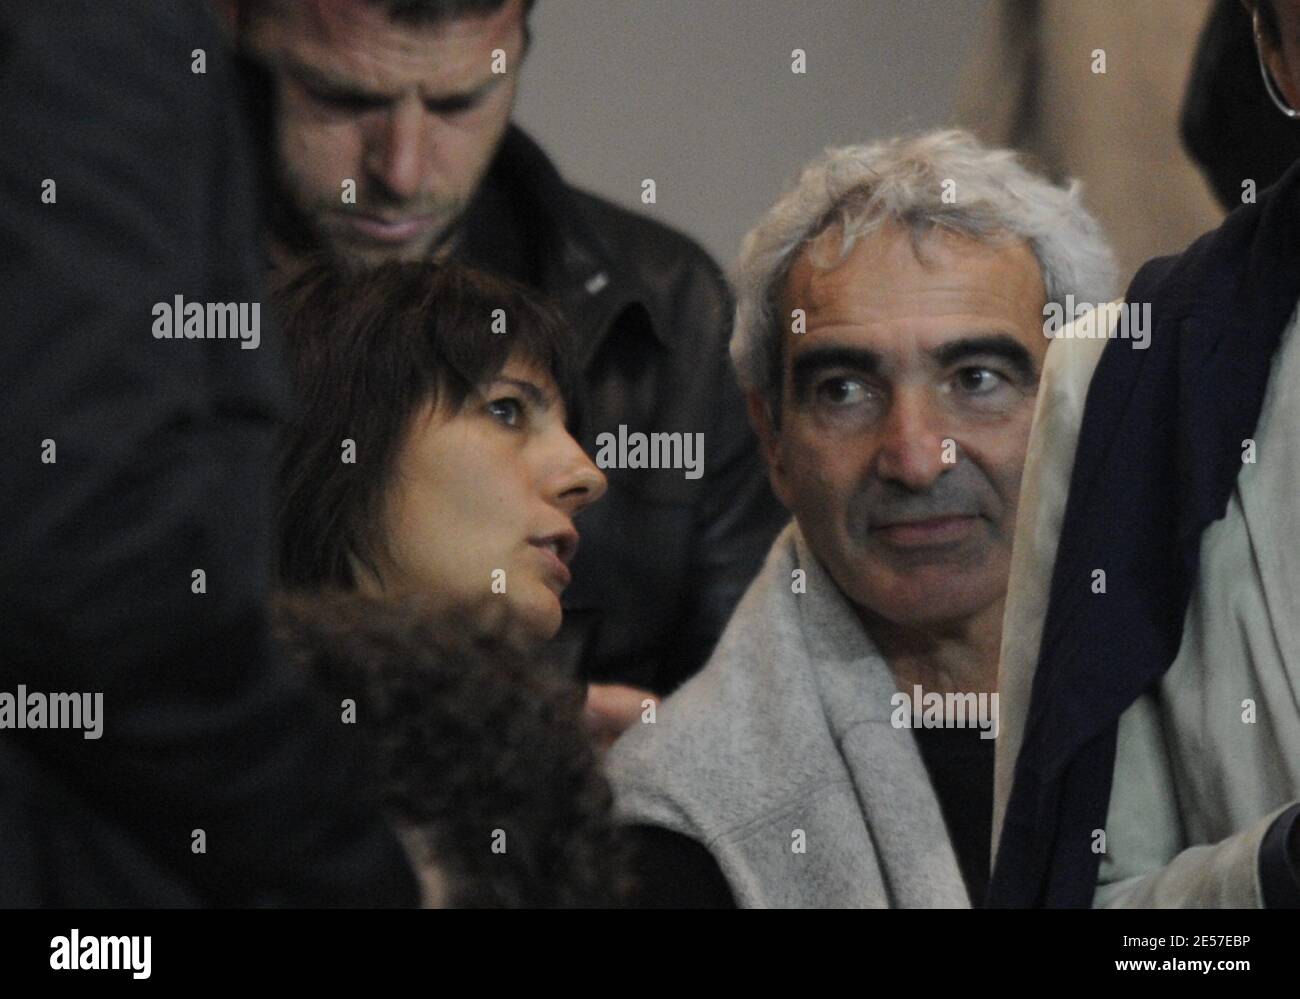 France's coach Raymond Domenech and his future wife Estelle Denis attend the French First soccer match, Paris Saint-Germain vs FC Nantes in Paris, France, on September 14, 2008. PSG won 1-0. Photo by Mehdi Taamallah/Cameleon/ABACAPRESS.COM Stock Photo